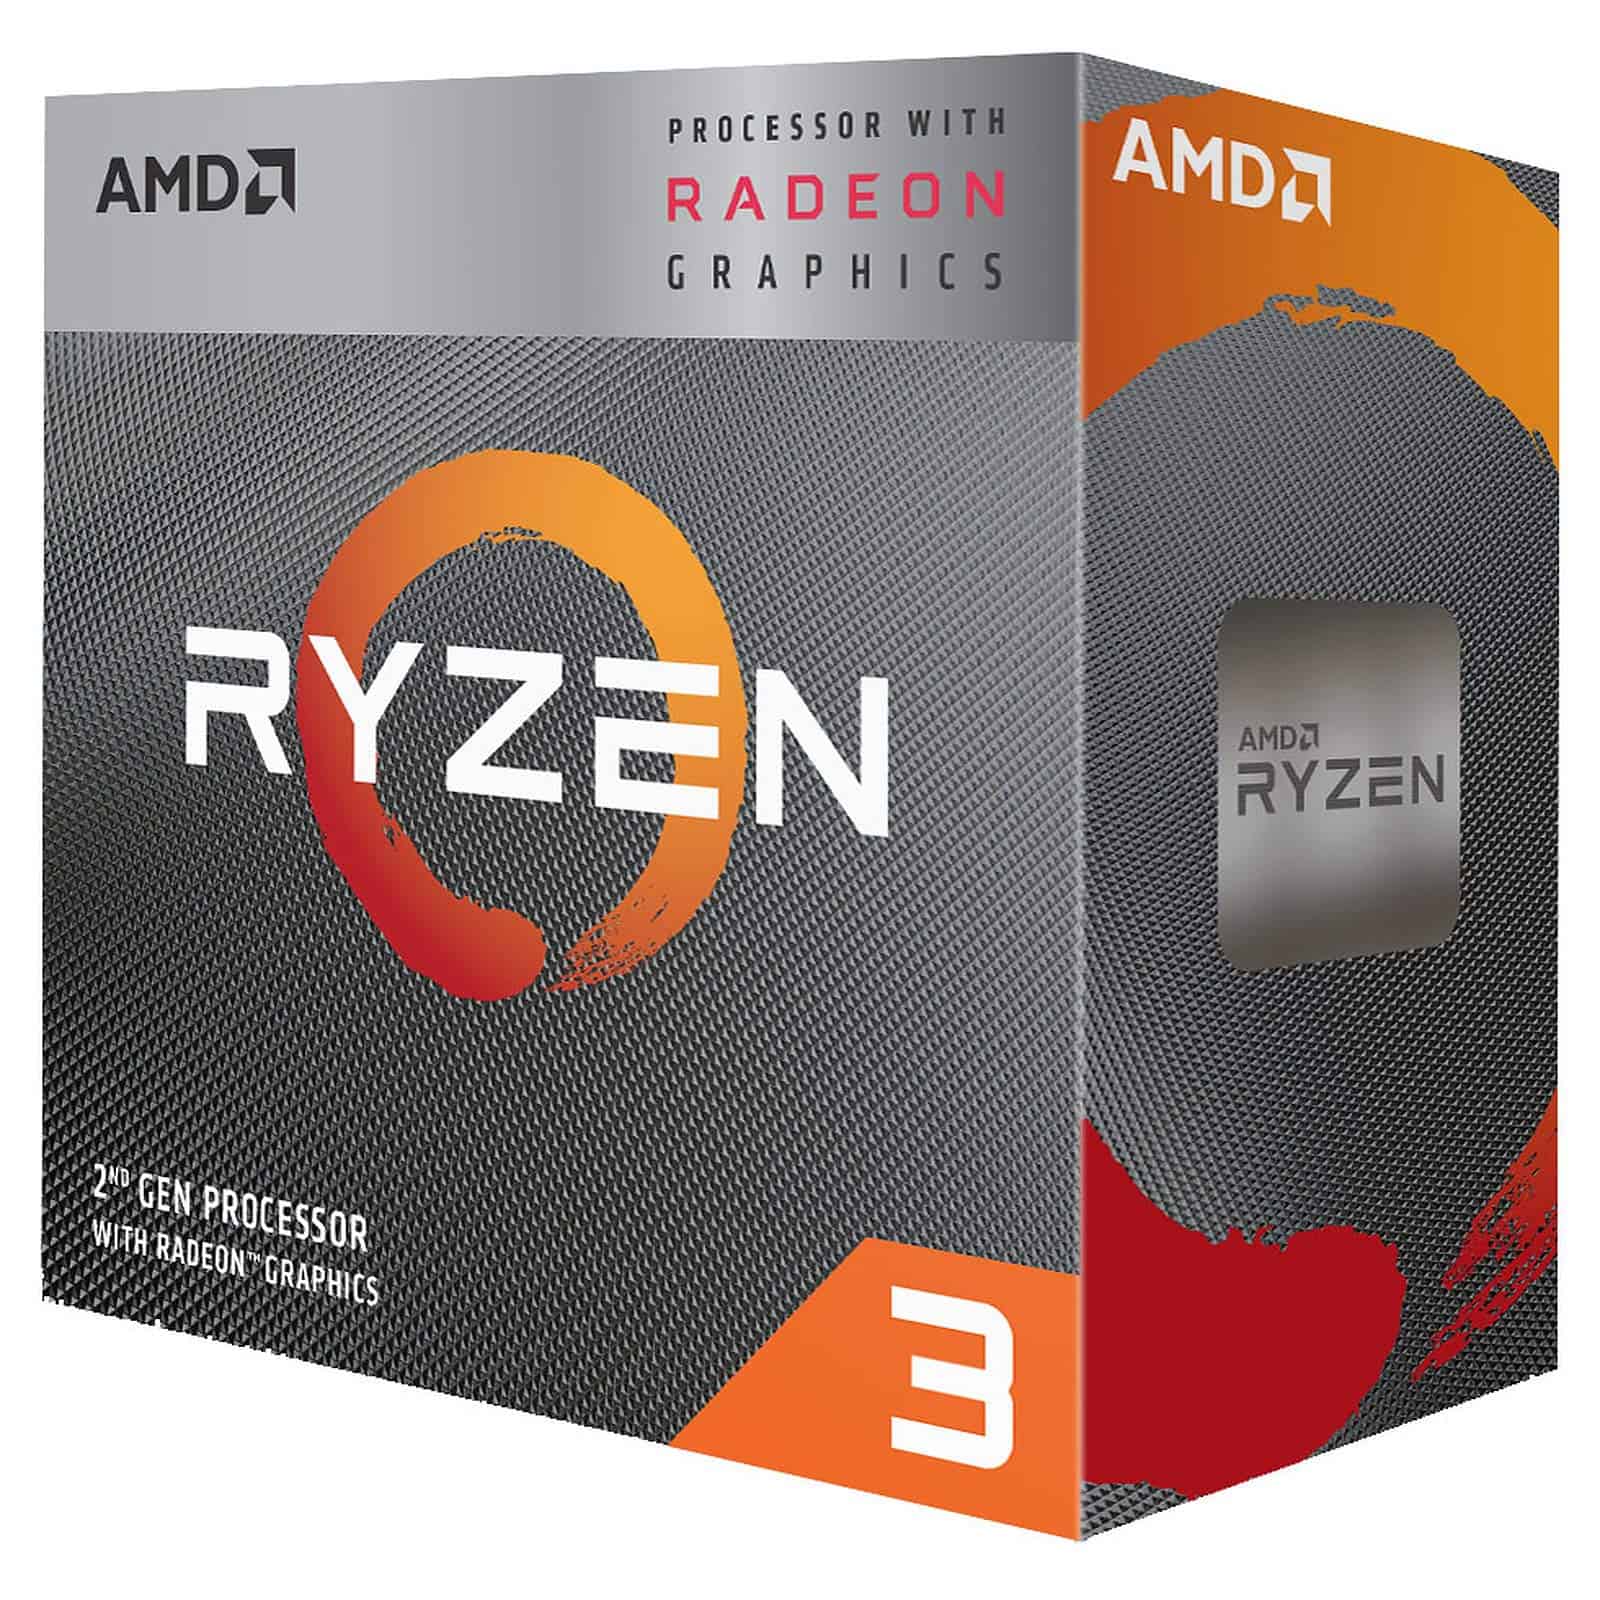 Can You Still Game With The Ryzen 3 3200G? 